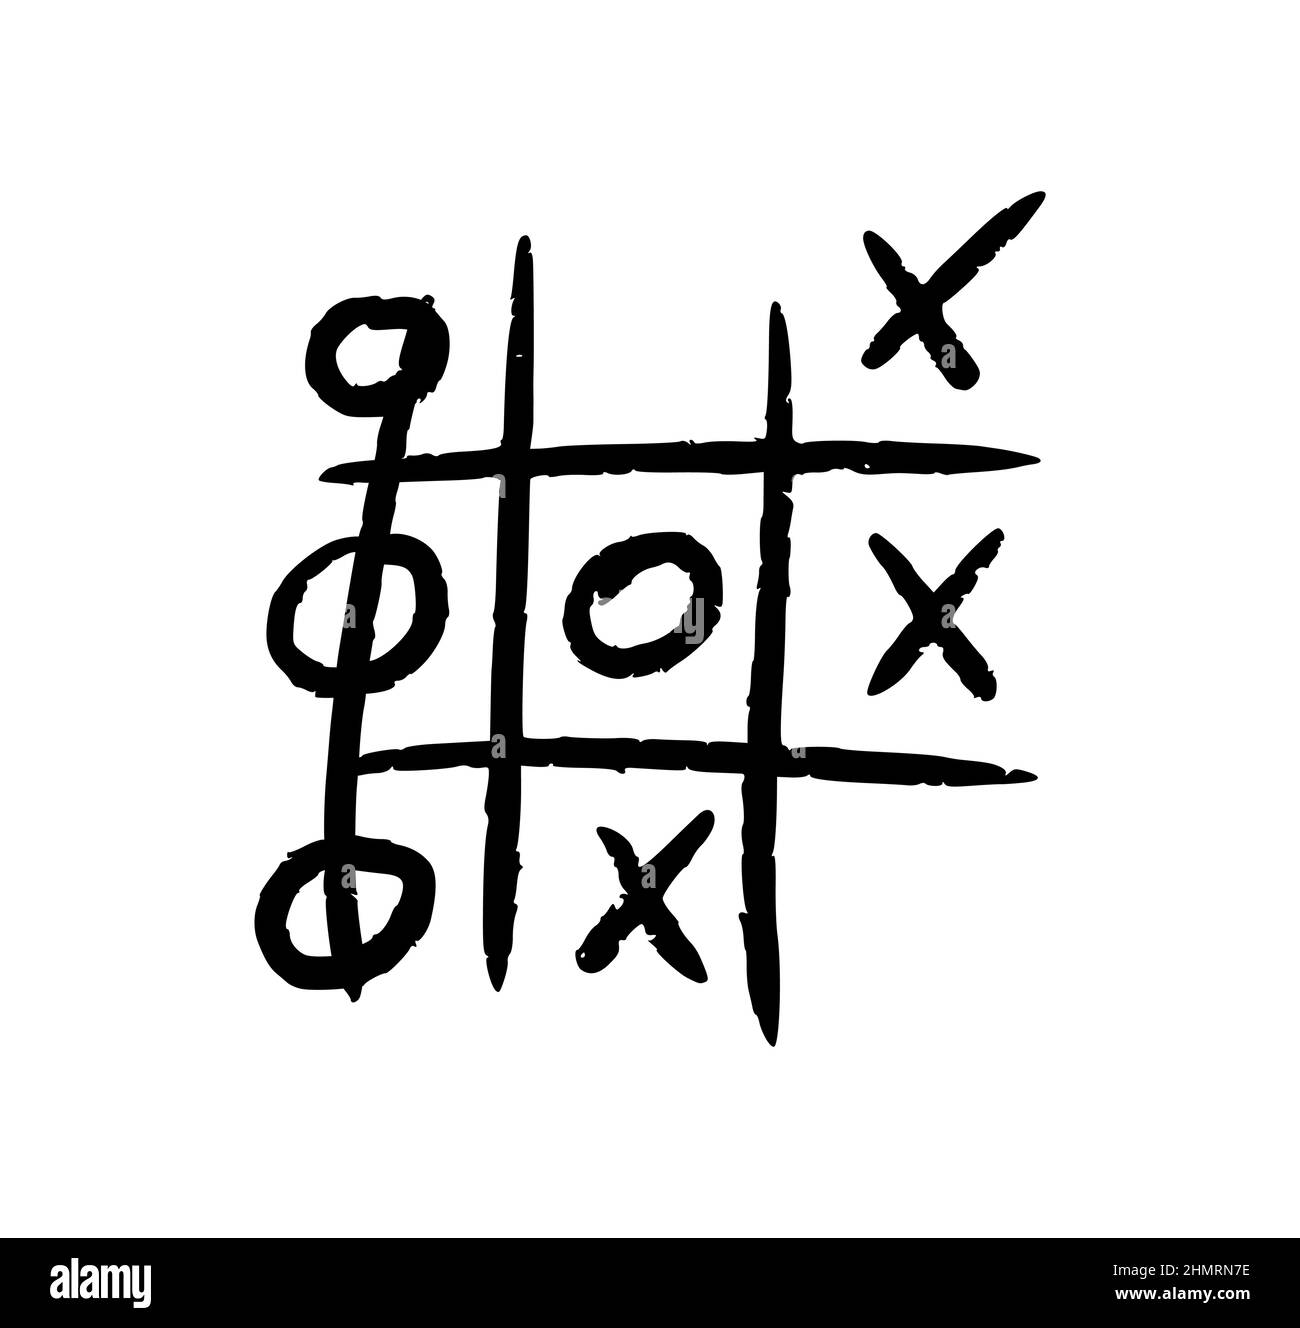 Tic tac toe game elements Royalty Free Vector Image